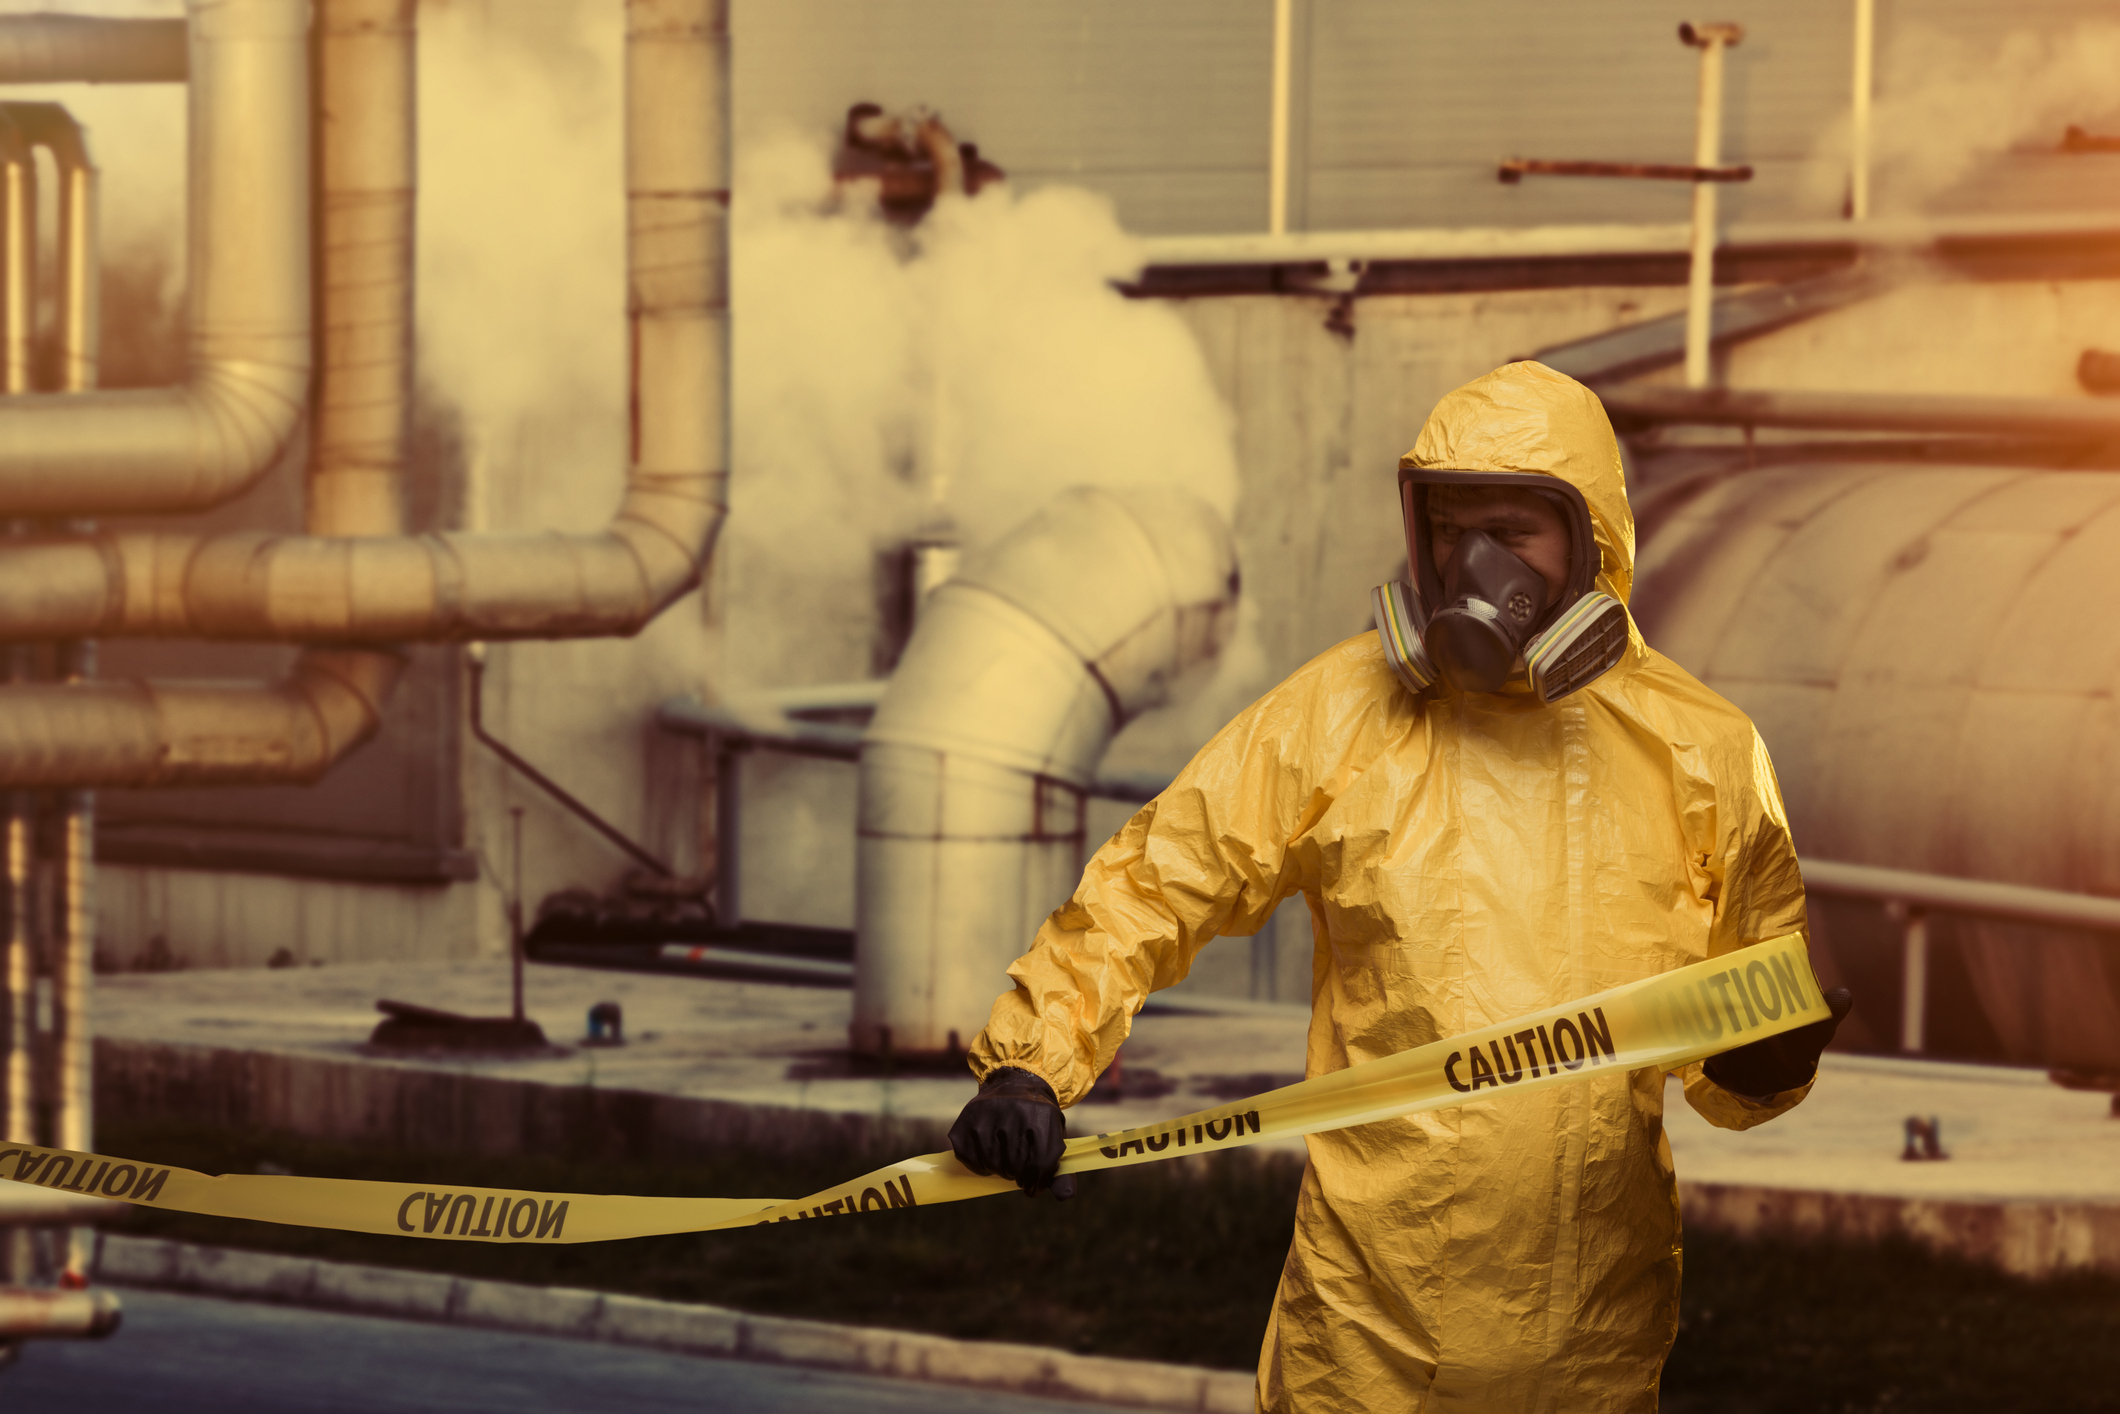 What You Need To Know About Hazwoper Hazardous Waste Operations And